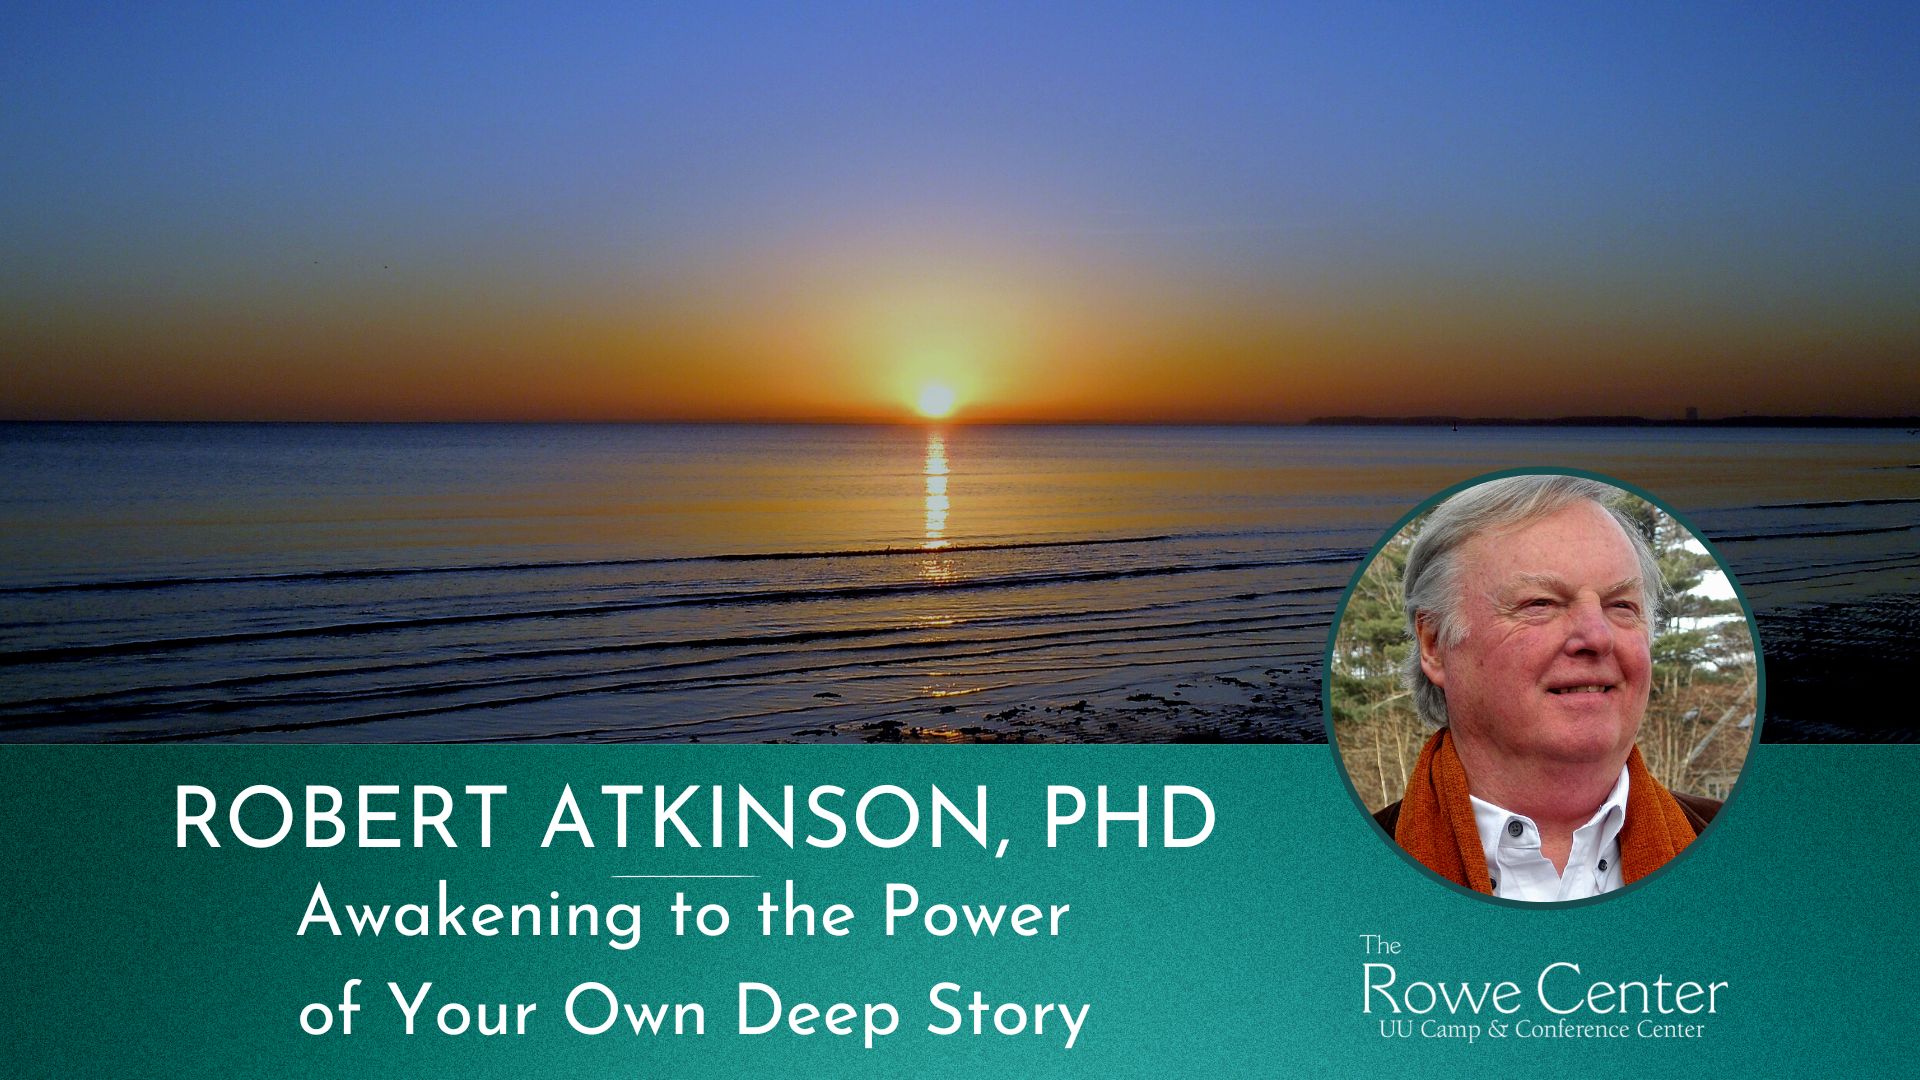 Awakening to the Power of Your Own Deep Story